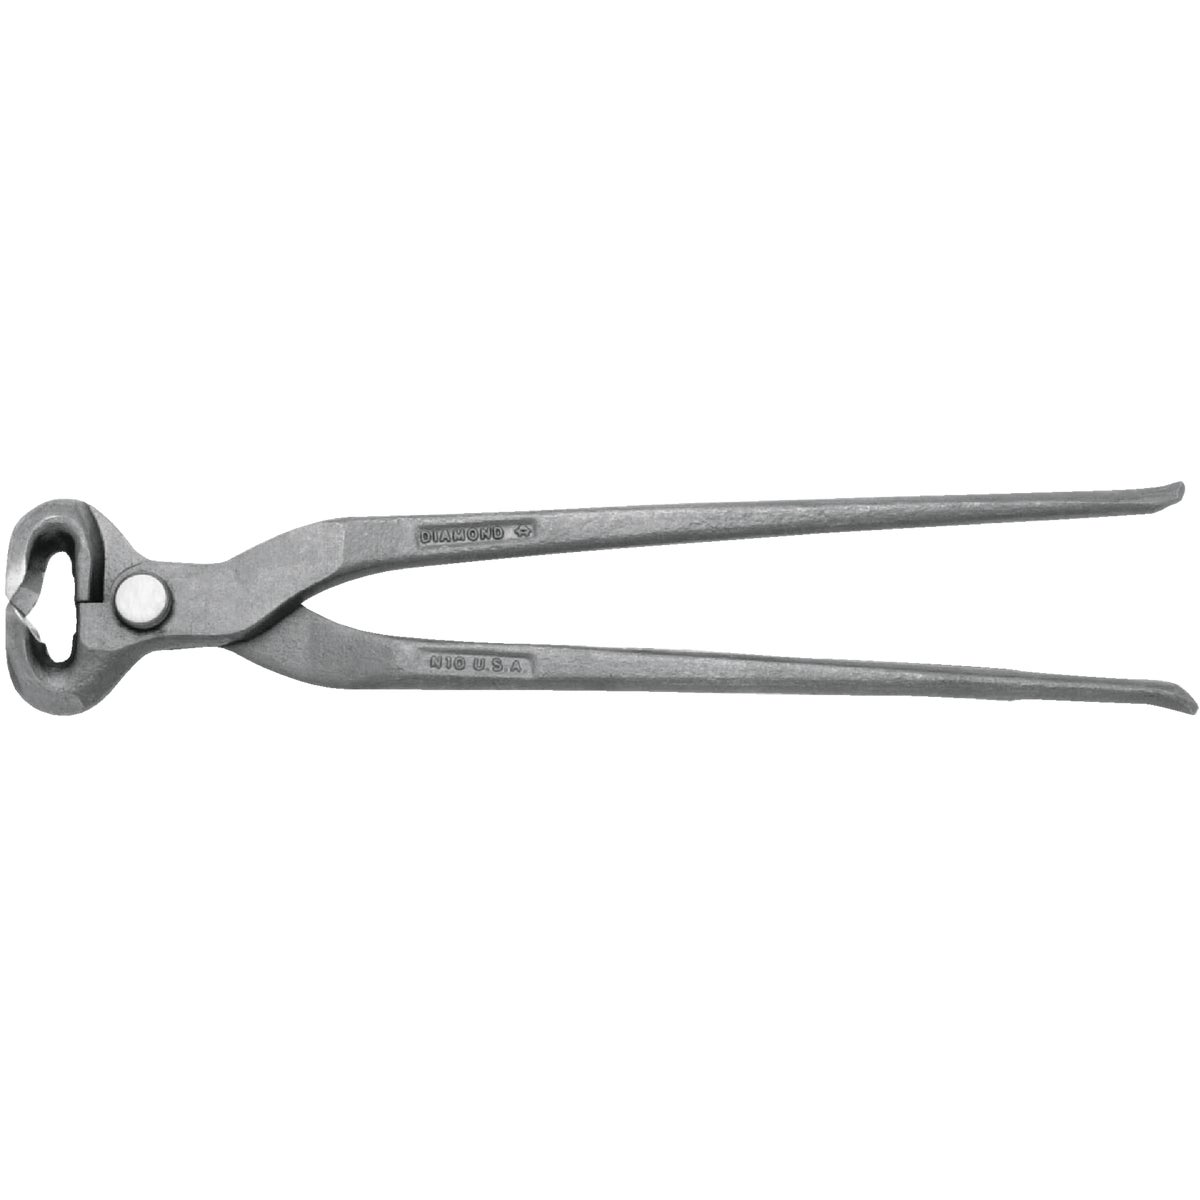 Item 741255, Developed specifically for cutting horseshoe nails.